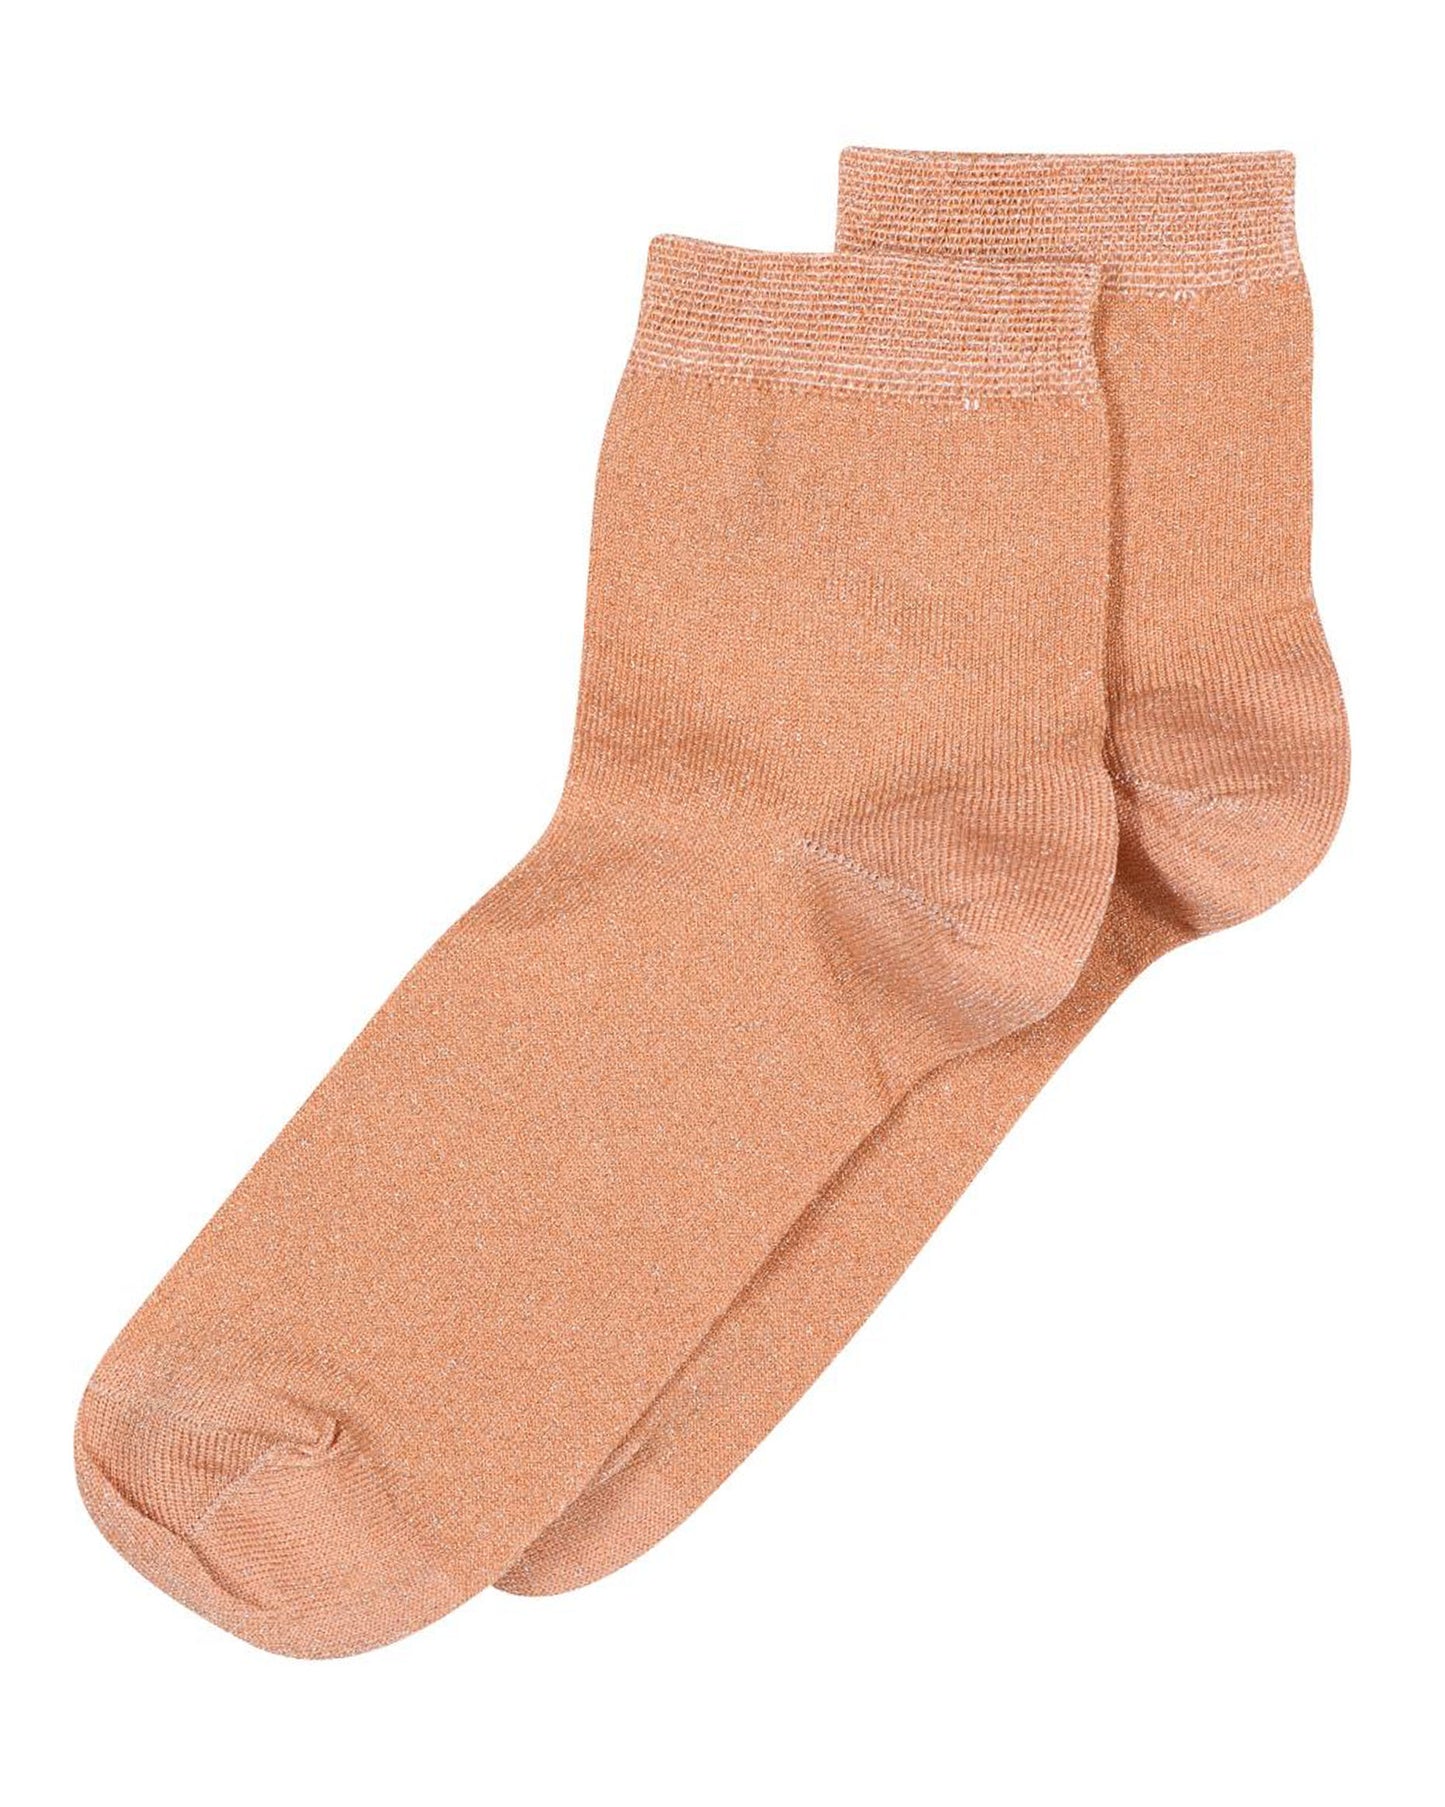 MP Denmark 77665 Pi Socks - Light pale orange quarter high fashion ankle socks with sparkly lame through out, plain cuff, shaped heel and flat toe seam.